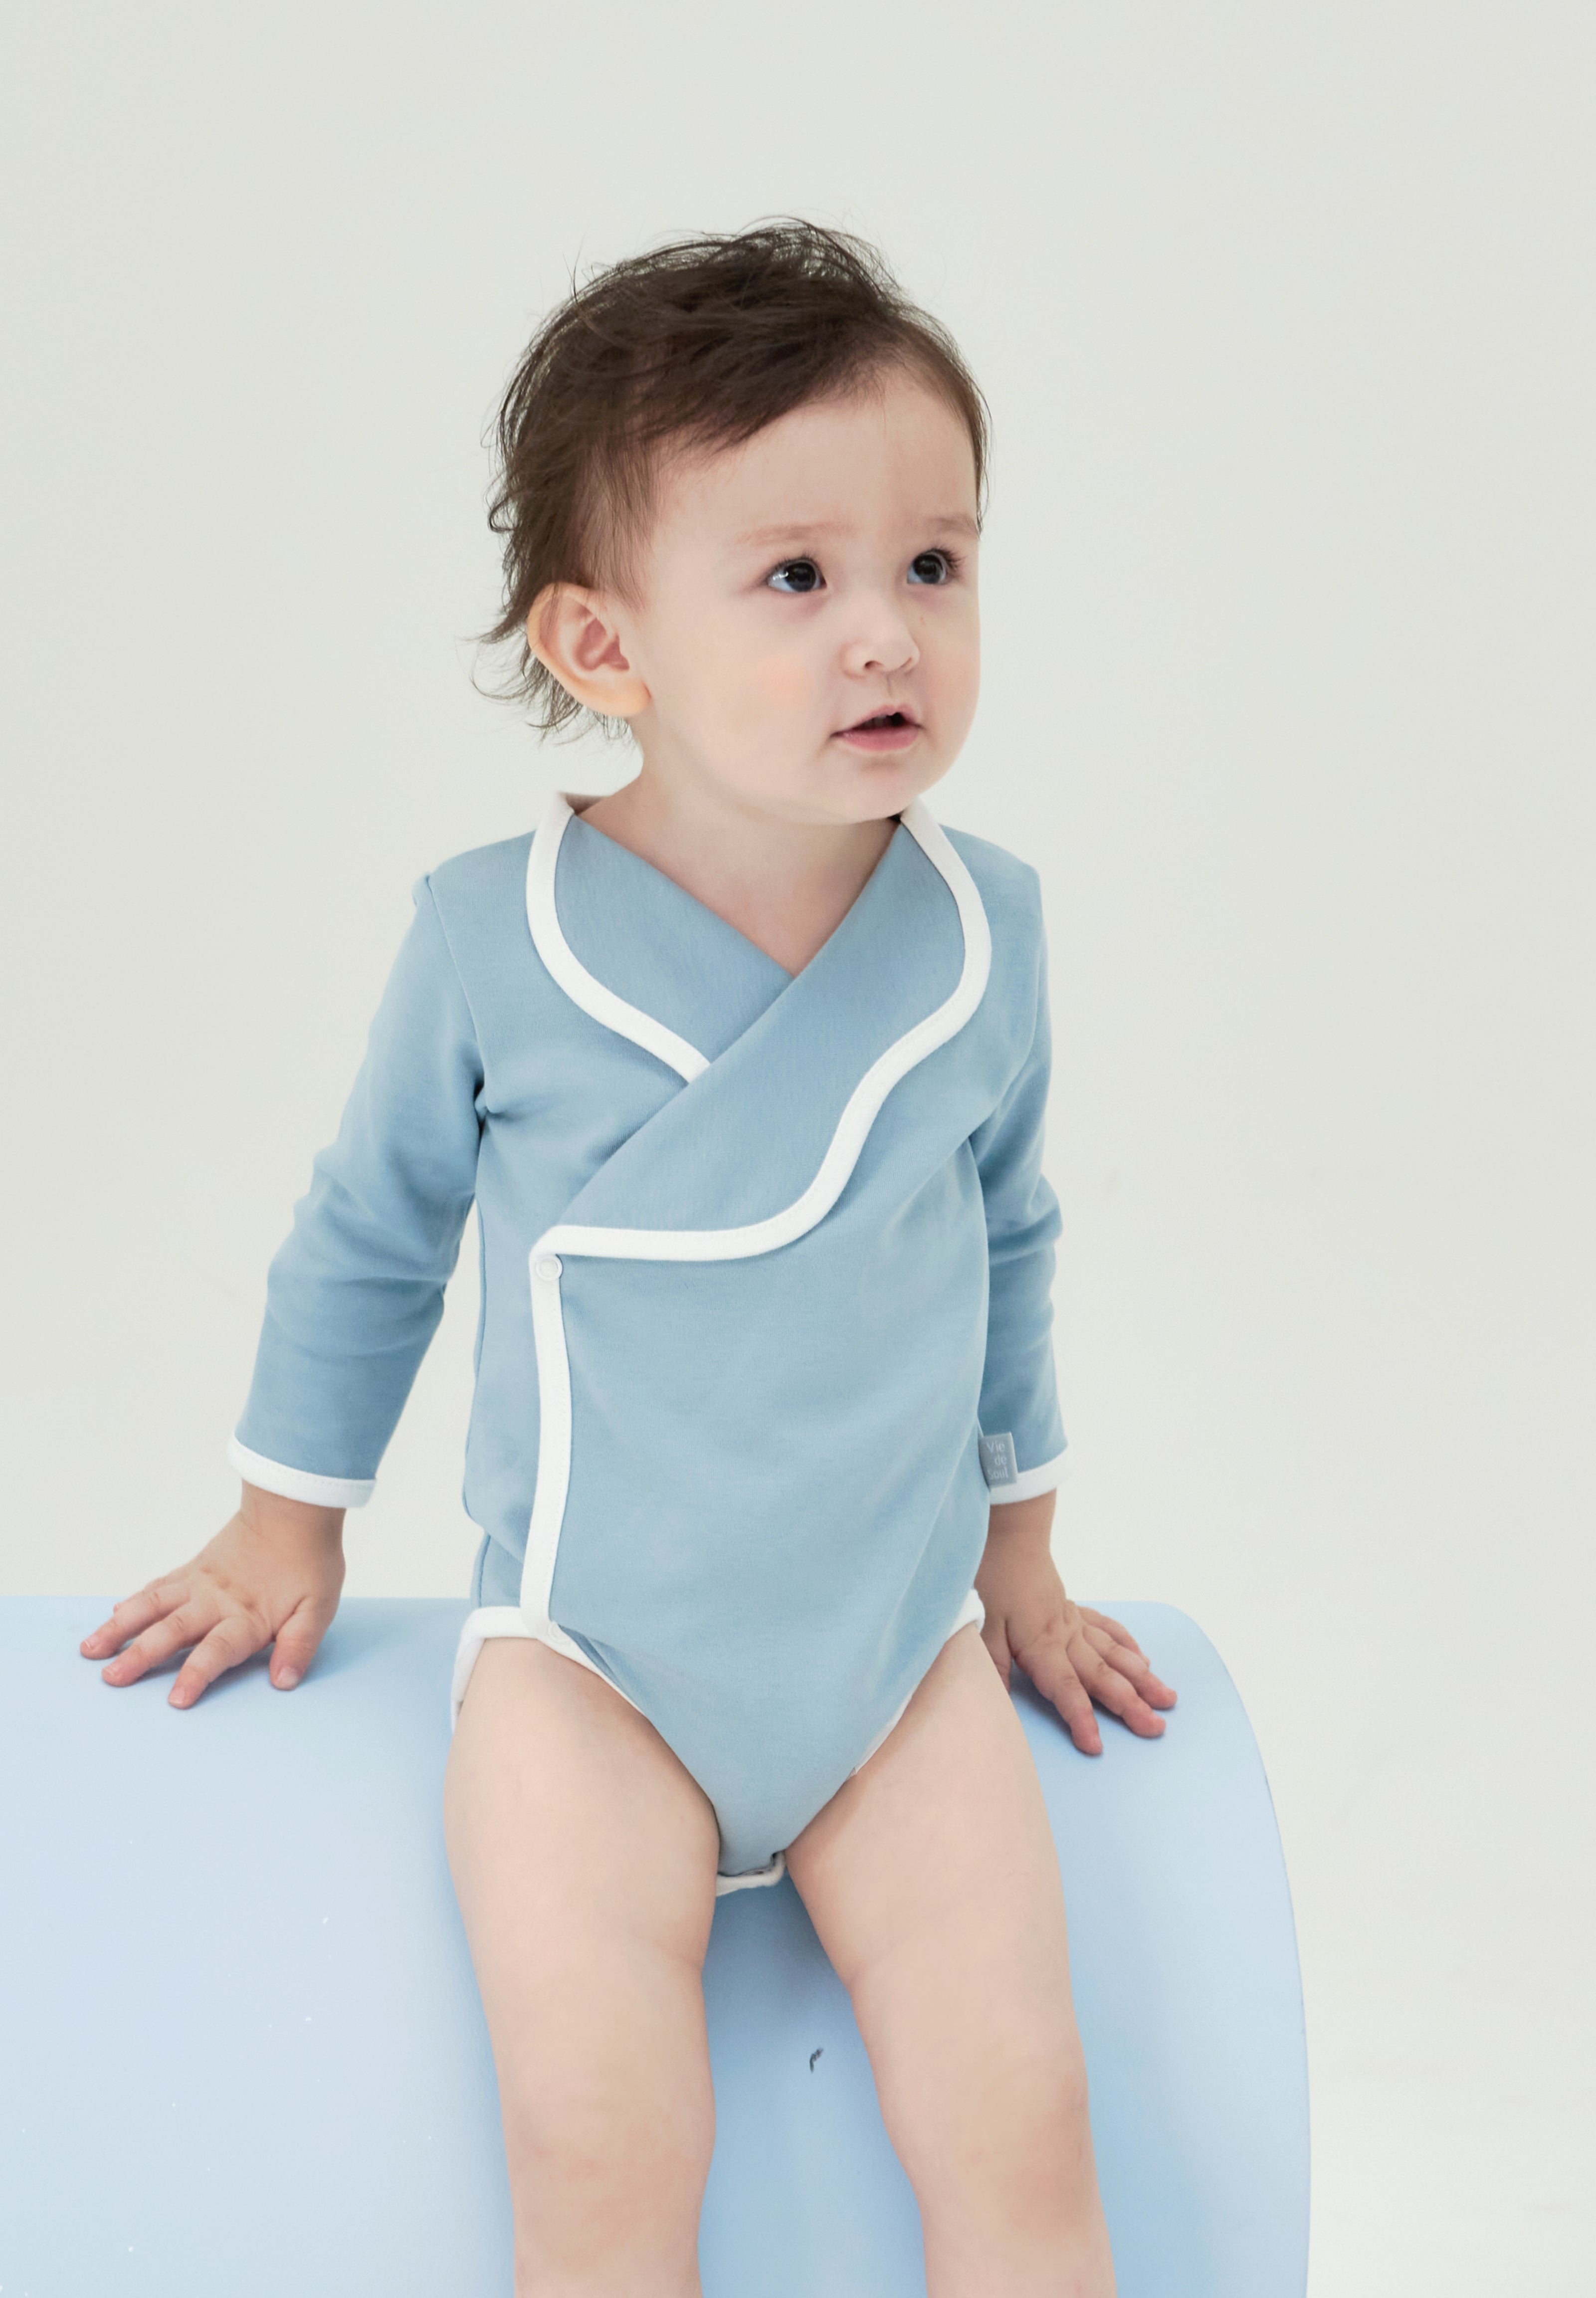 Misty Blue Tailored Bodysuit: Soft, wavy collar with an open button design. Suitable for indoor, outdoor, or special occasions.